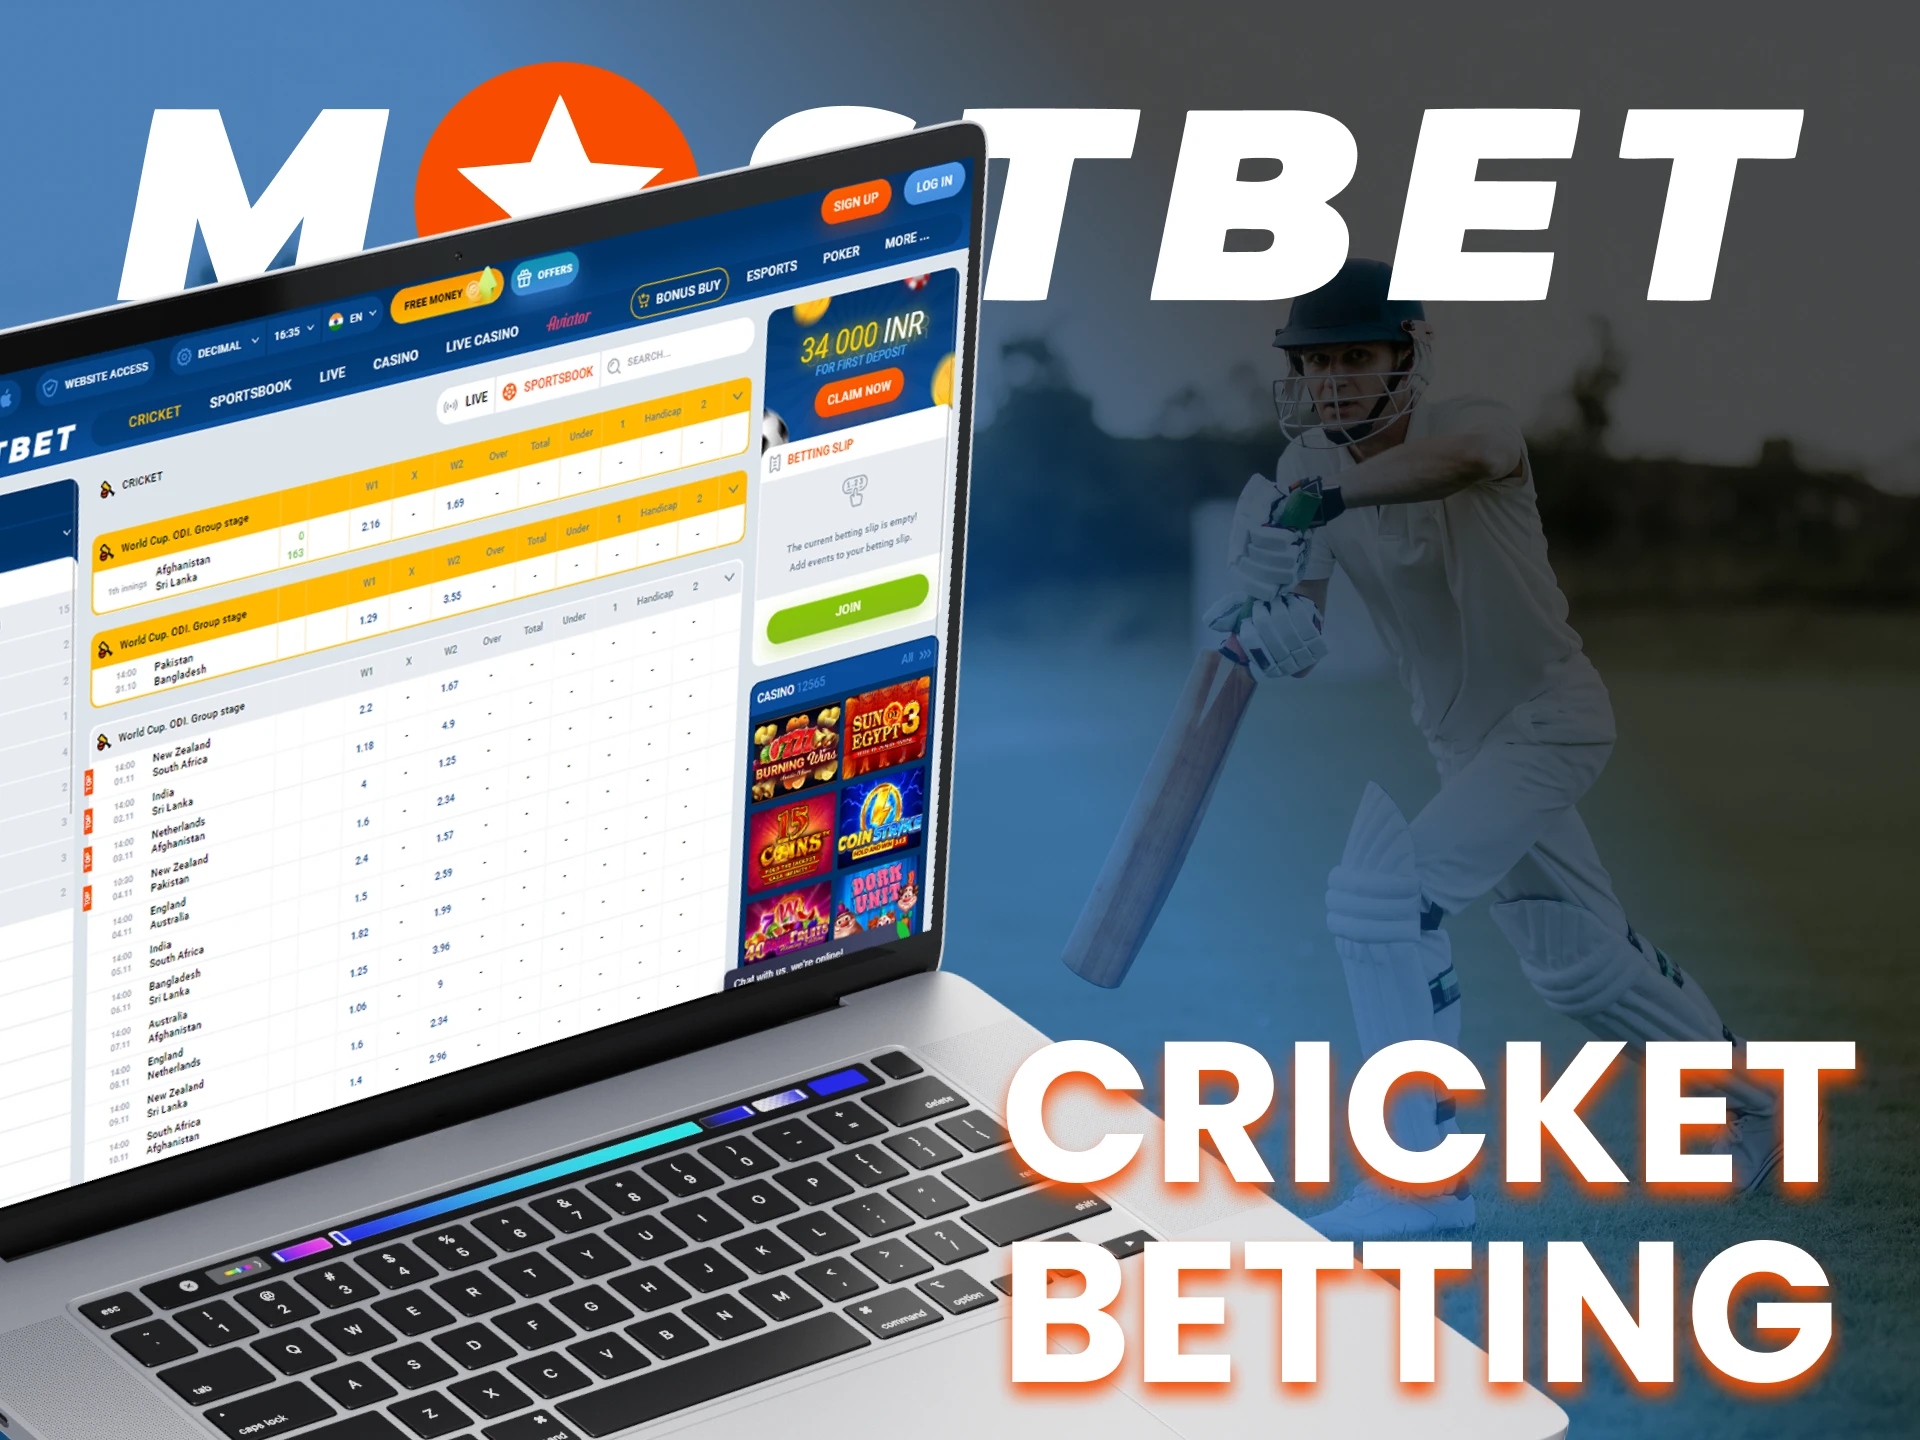 At Mostbet, bet on cricket.